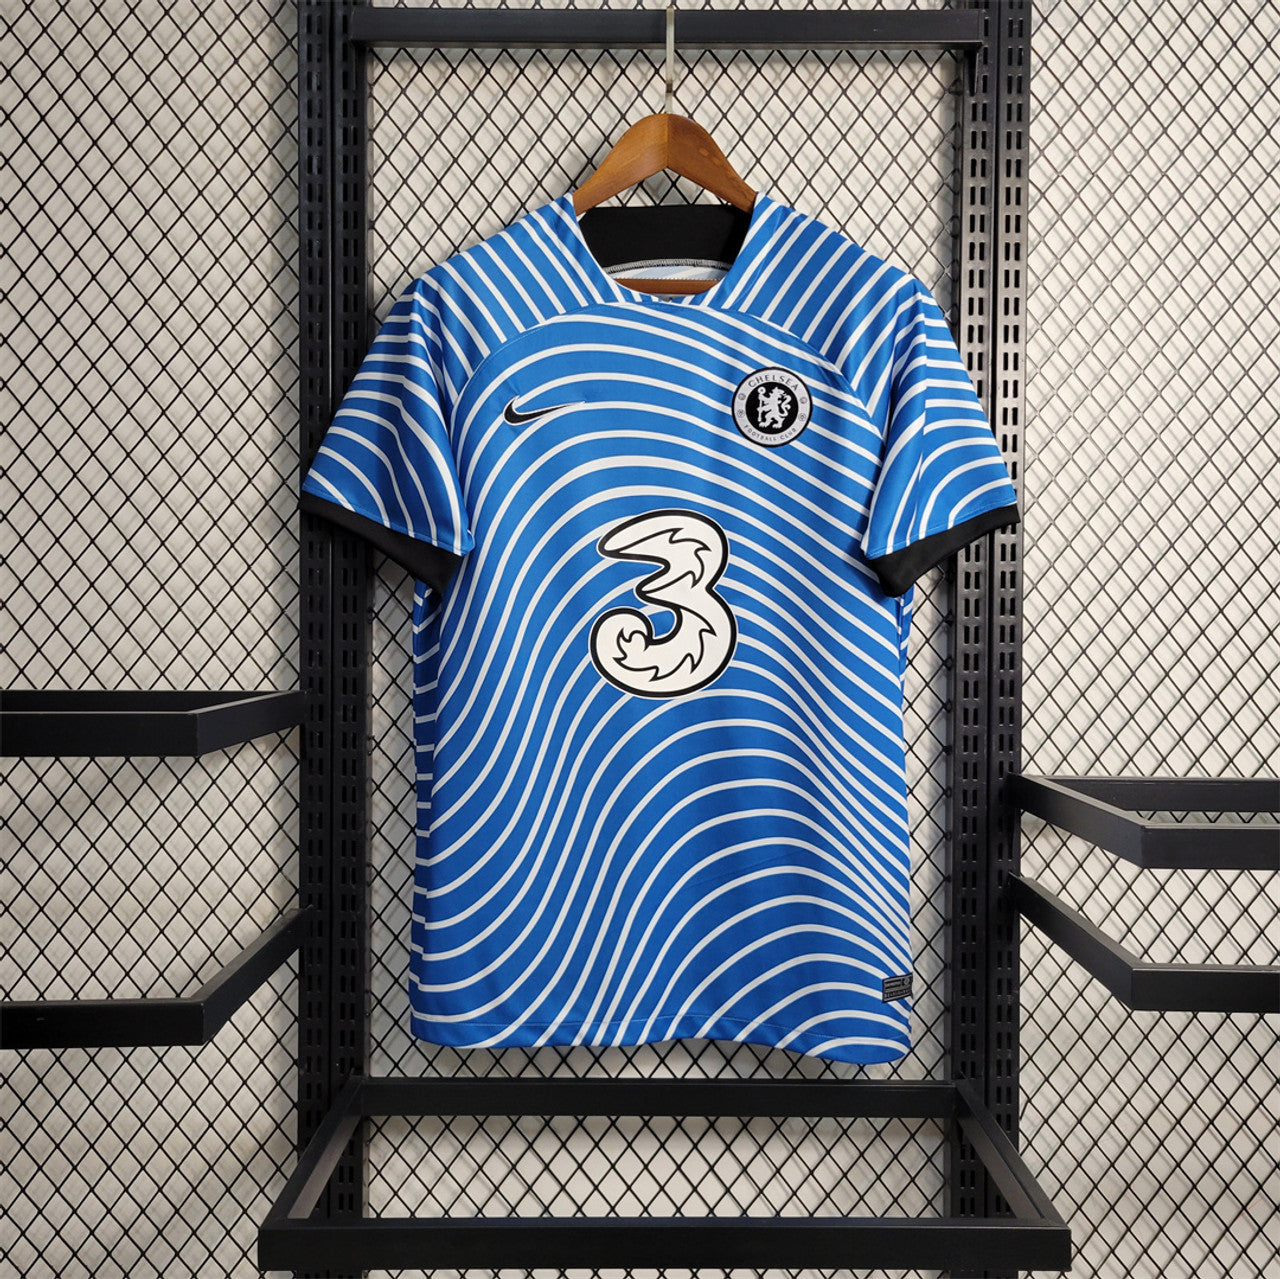 Chelsea Waves Special Edition Kit